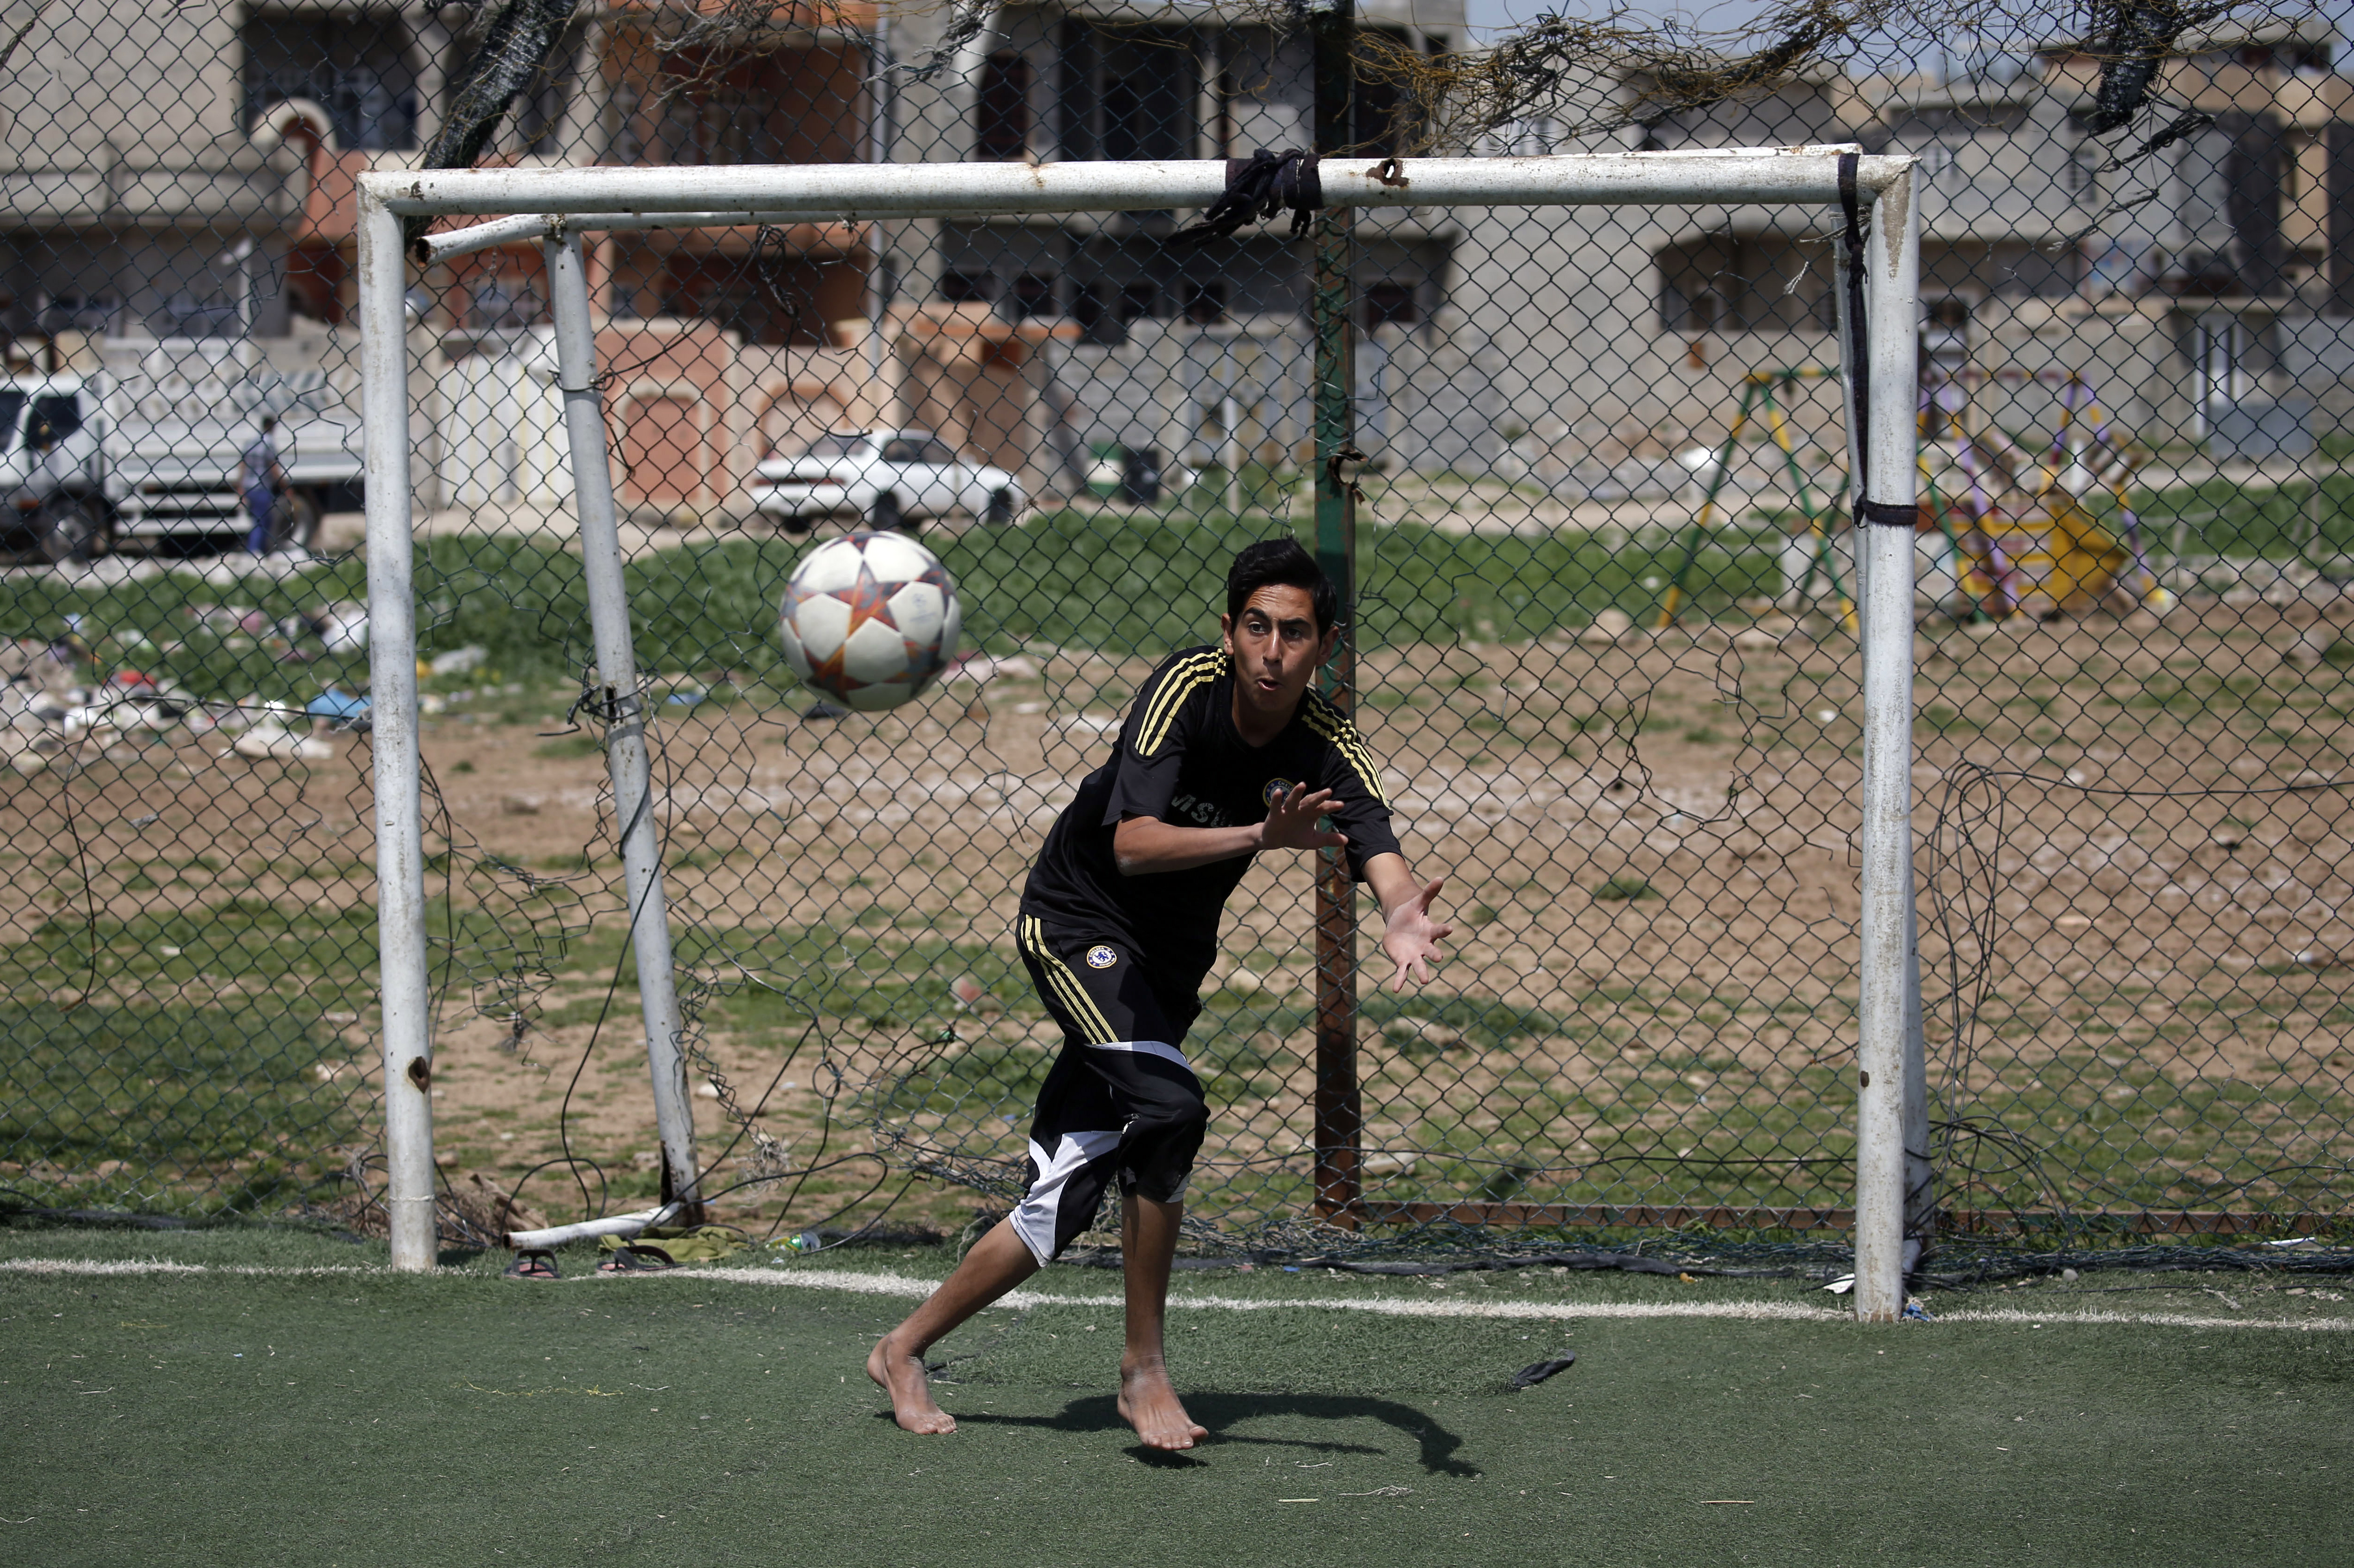 A goalkeeper attempts to stop a shot during a football match in eastern Mosul's al-Salam neighbourhood on April 7, 2017. It was a grim time for football: jihadists observed matches, jerseys from foreign teams were banned and even whistling was prohibited when the Islamic State group held Iraq's Mosul. / AFP PHOTO / AHMAD GHARABLI